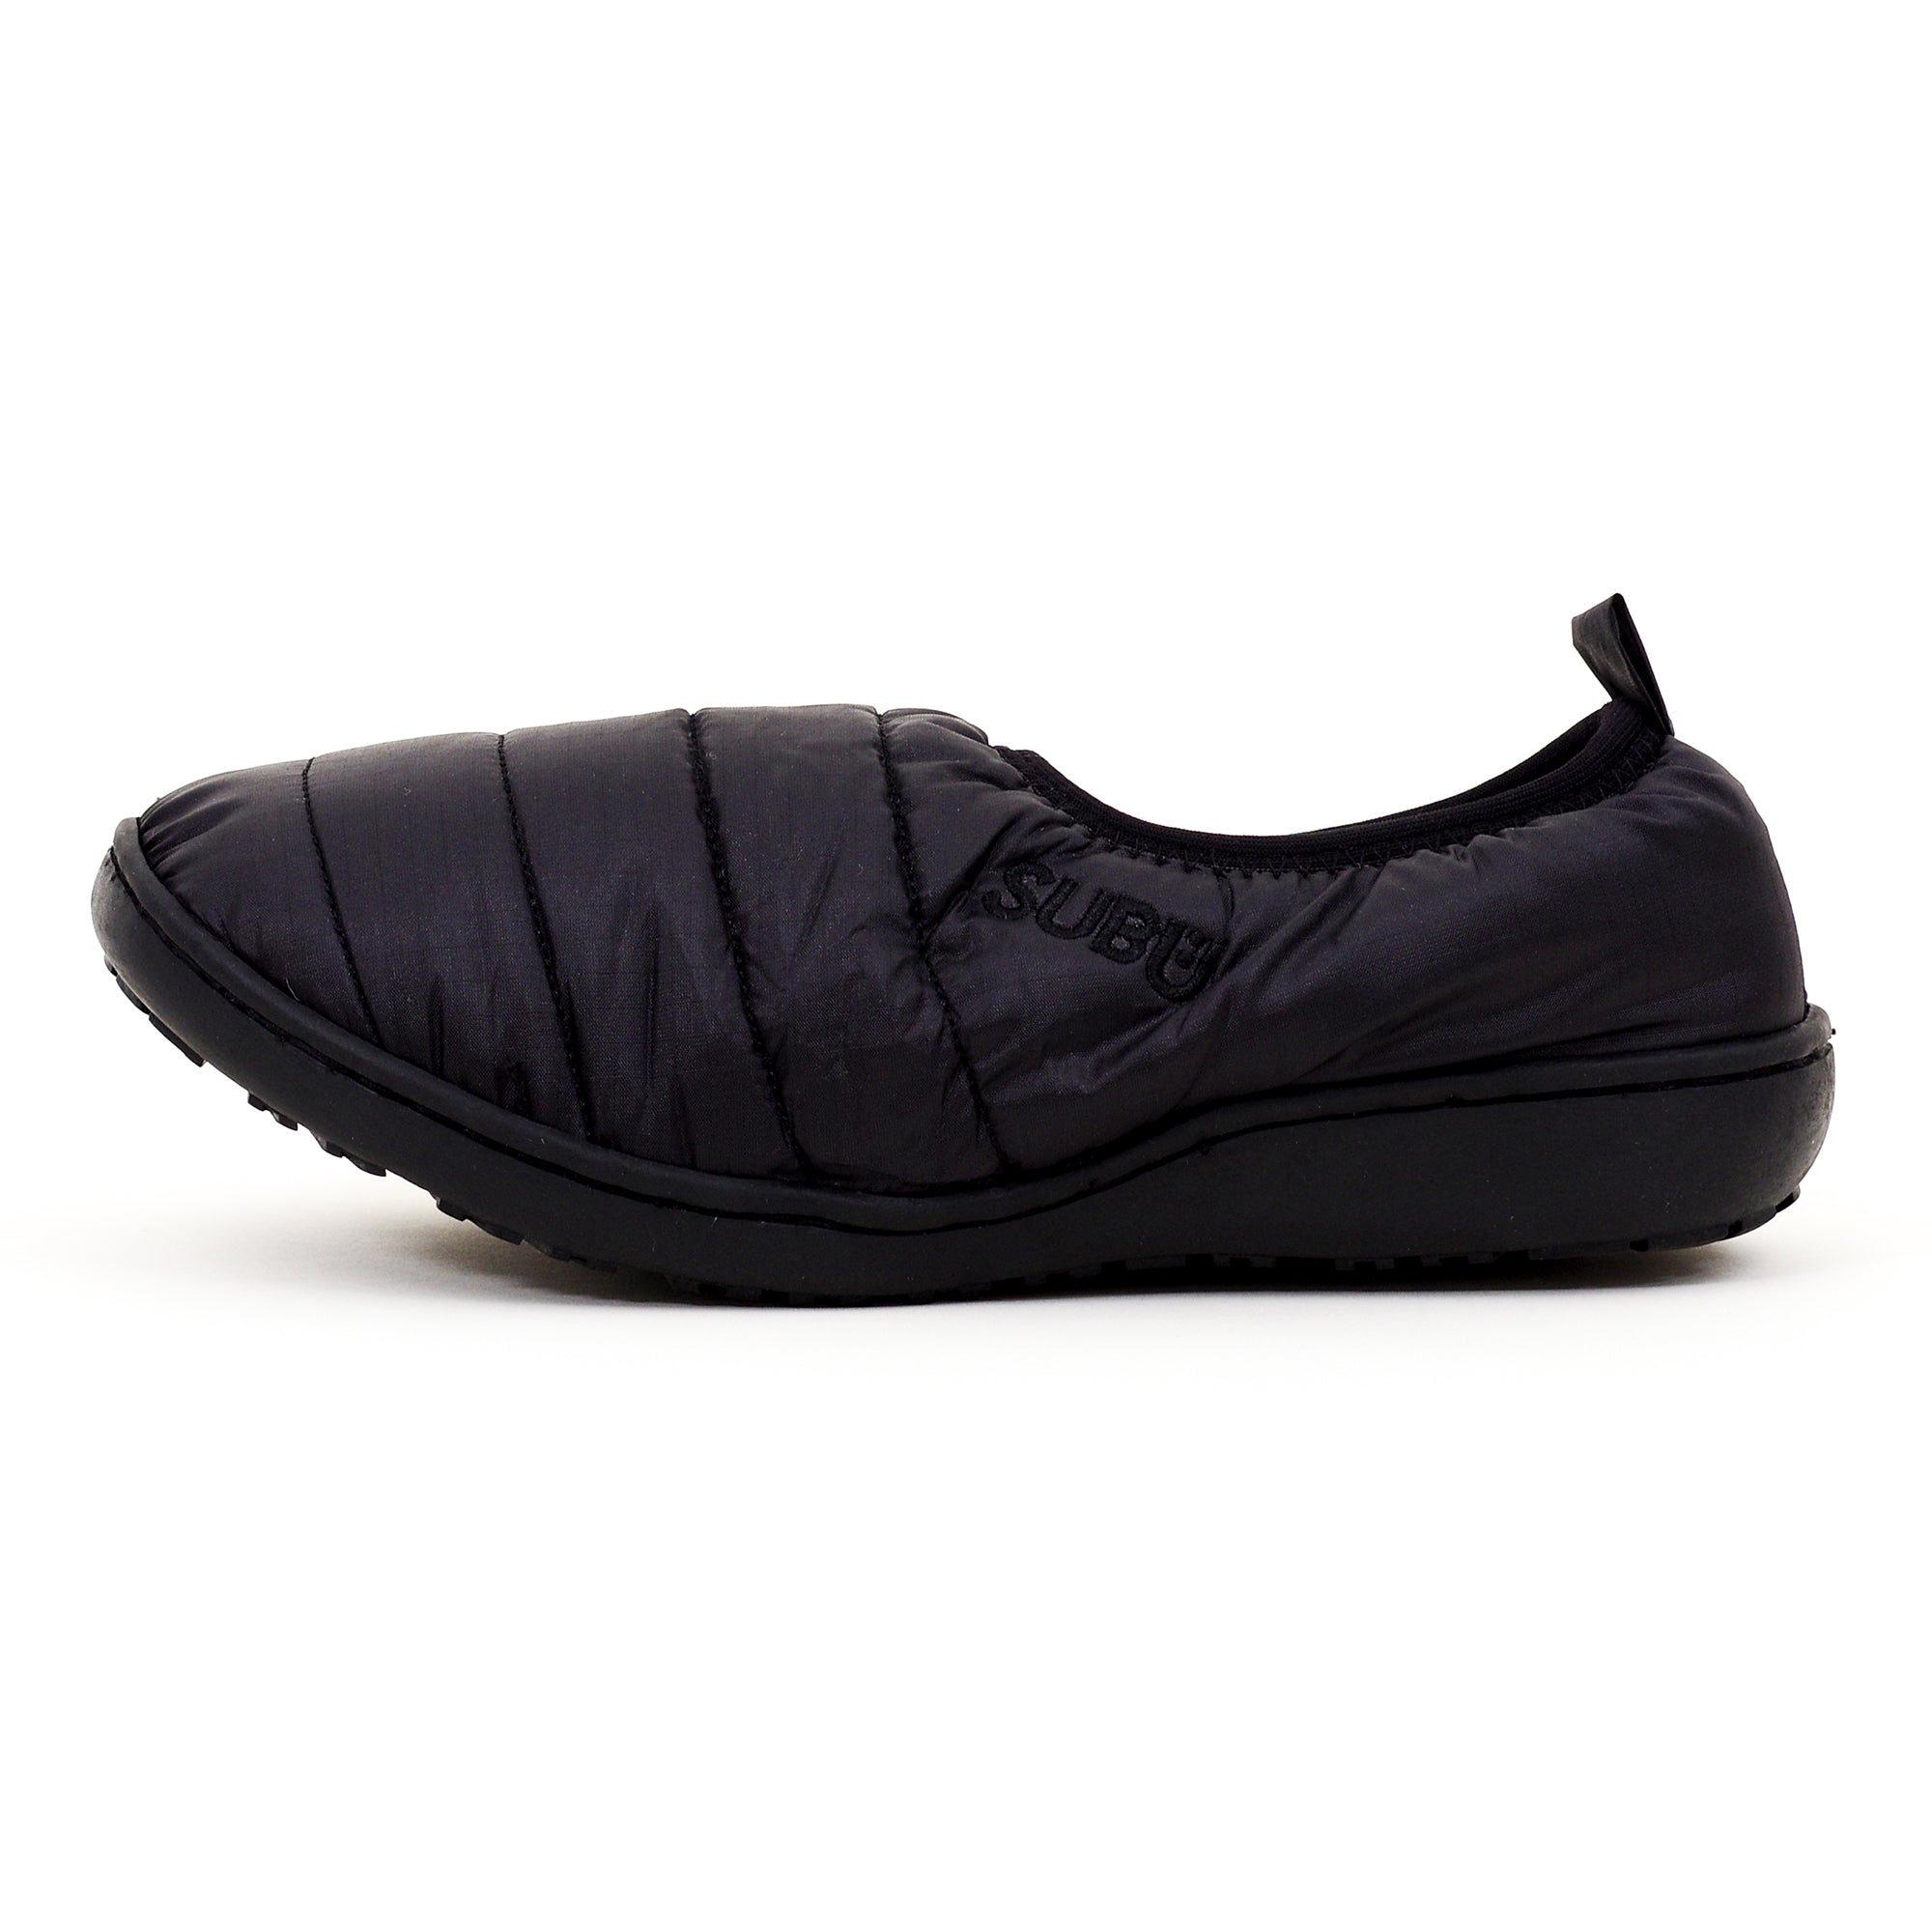 Subu Packable Slippers - Gloss Black